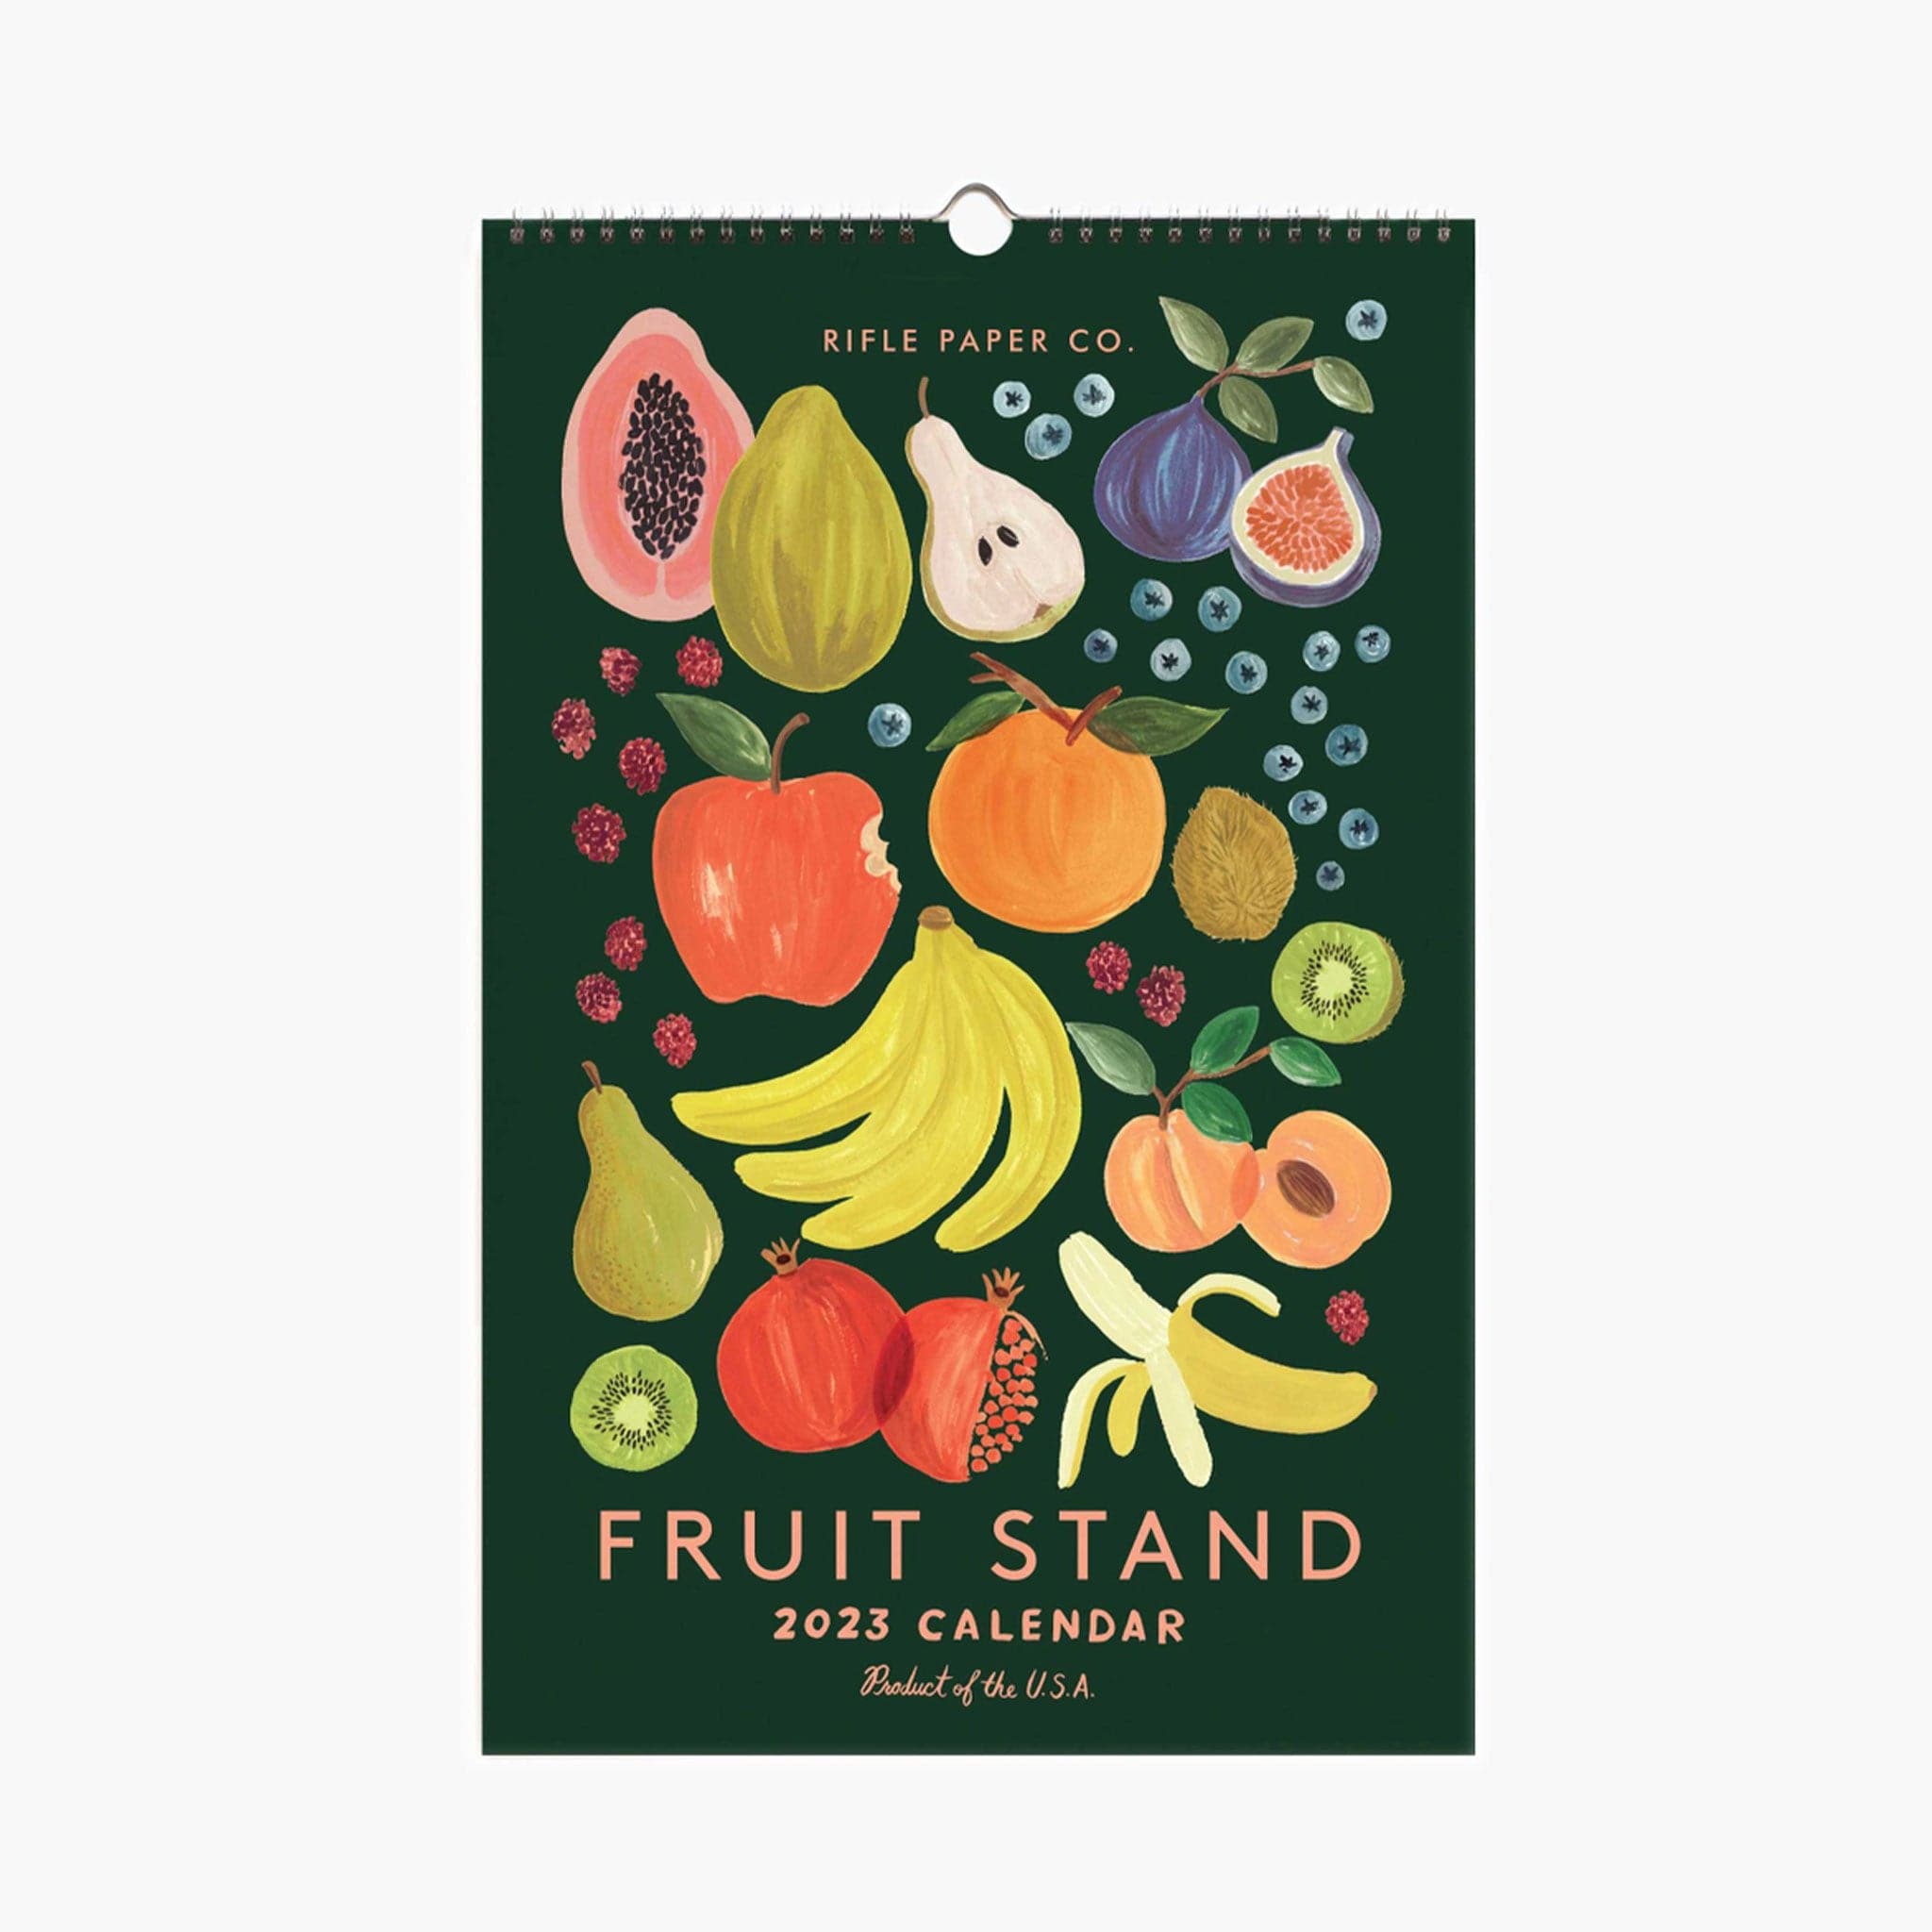 A black spiral bound calendar with an assortment of fruit on the front cover and reads, "Fruit Stand, 2023 Calendar".